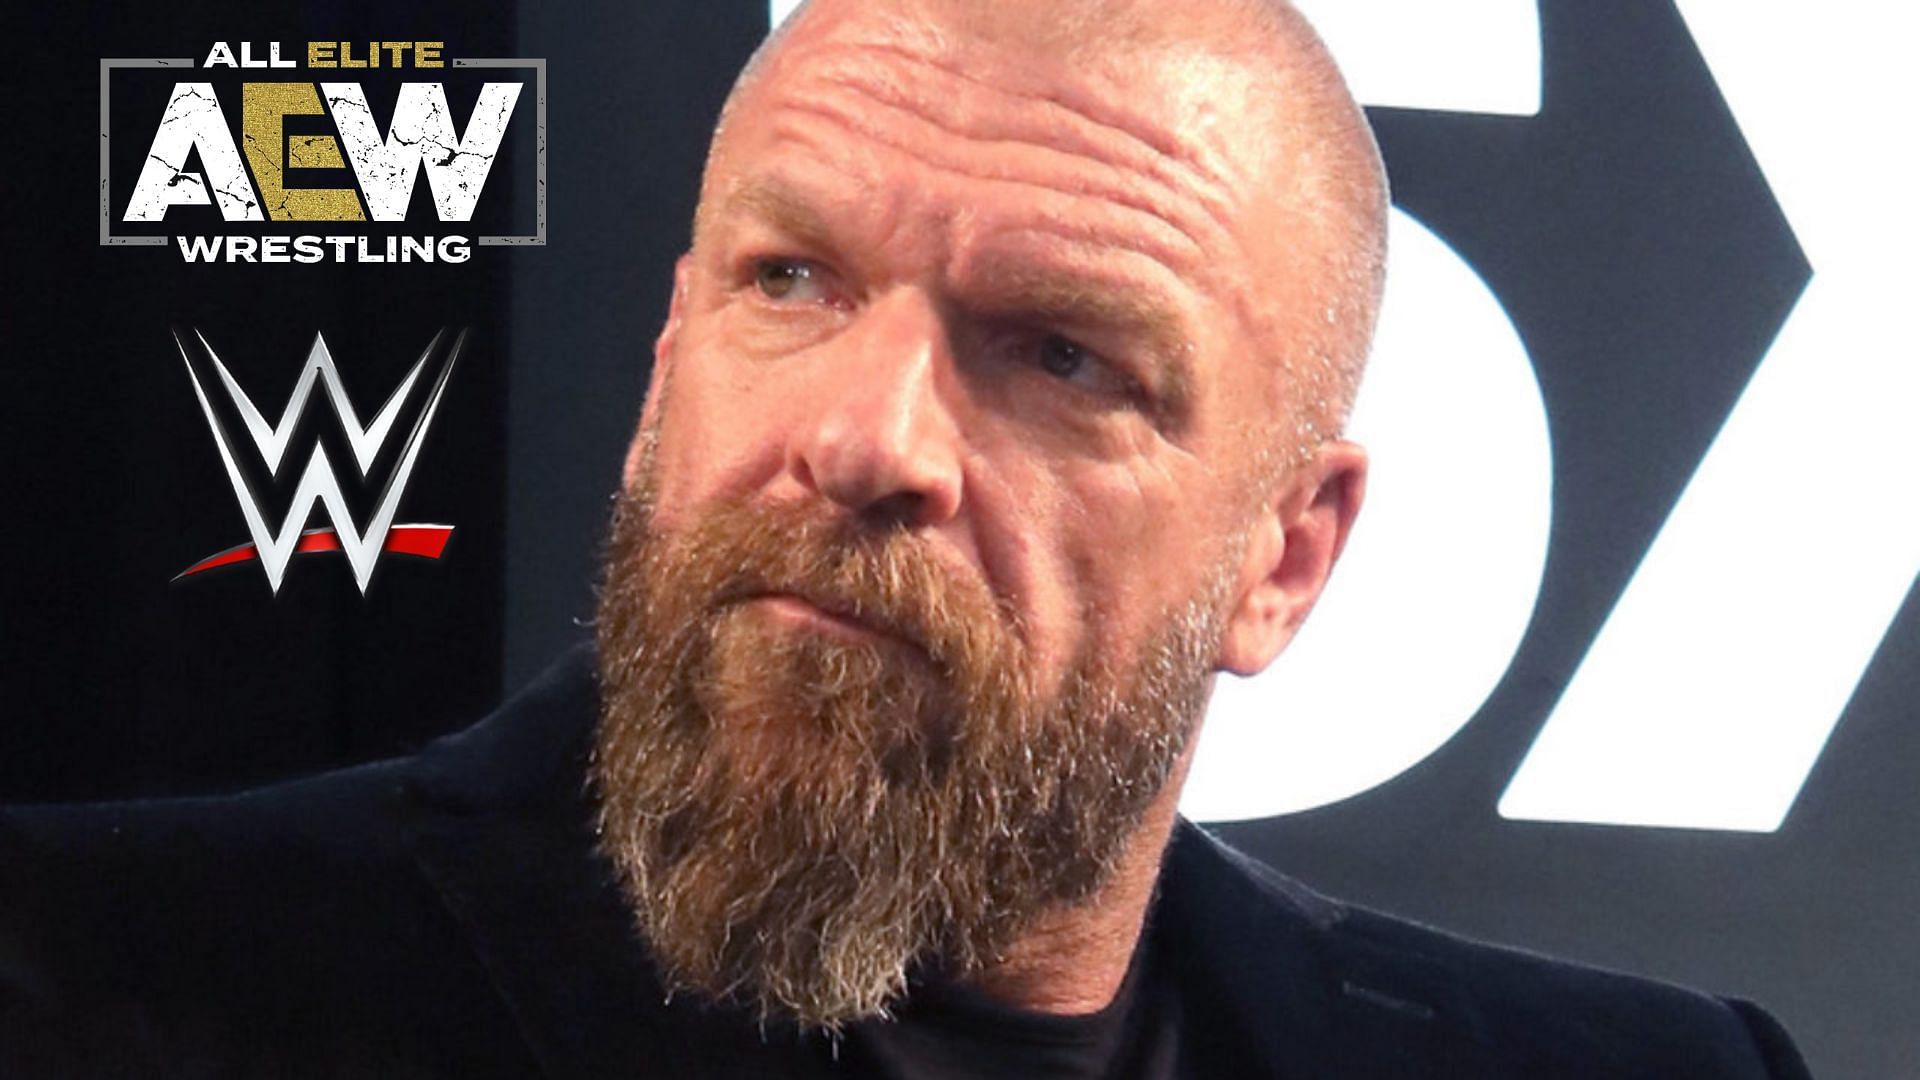 Is Triple H going to bring in an ex-AEW star?